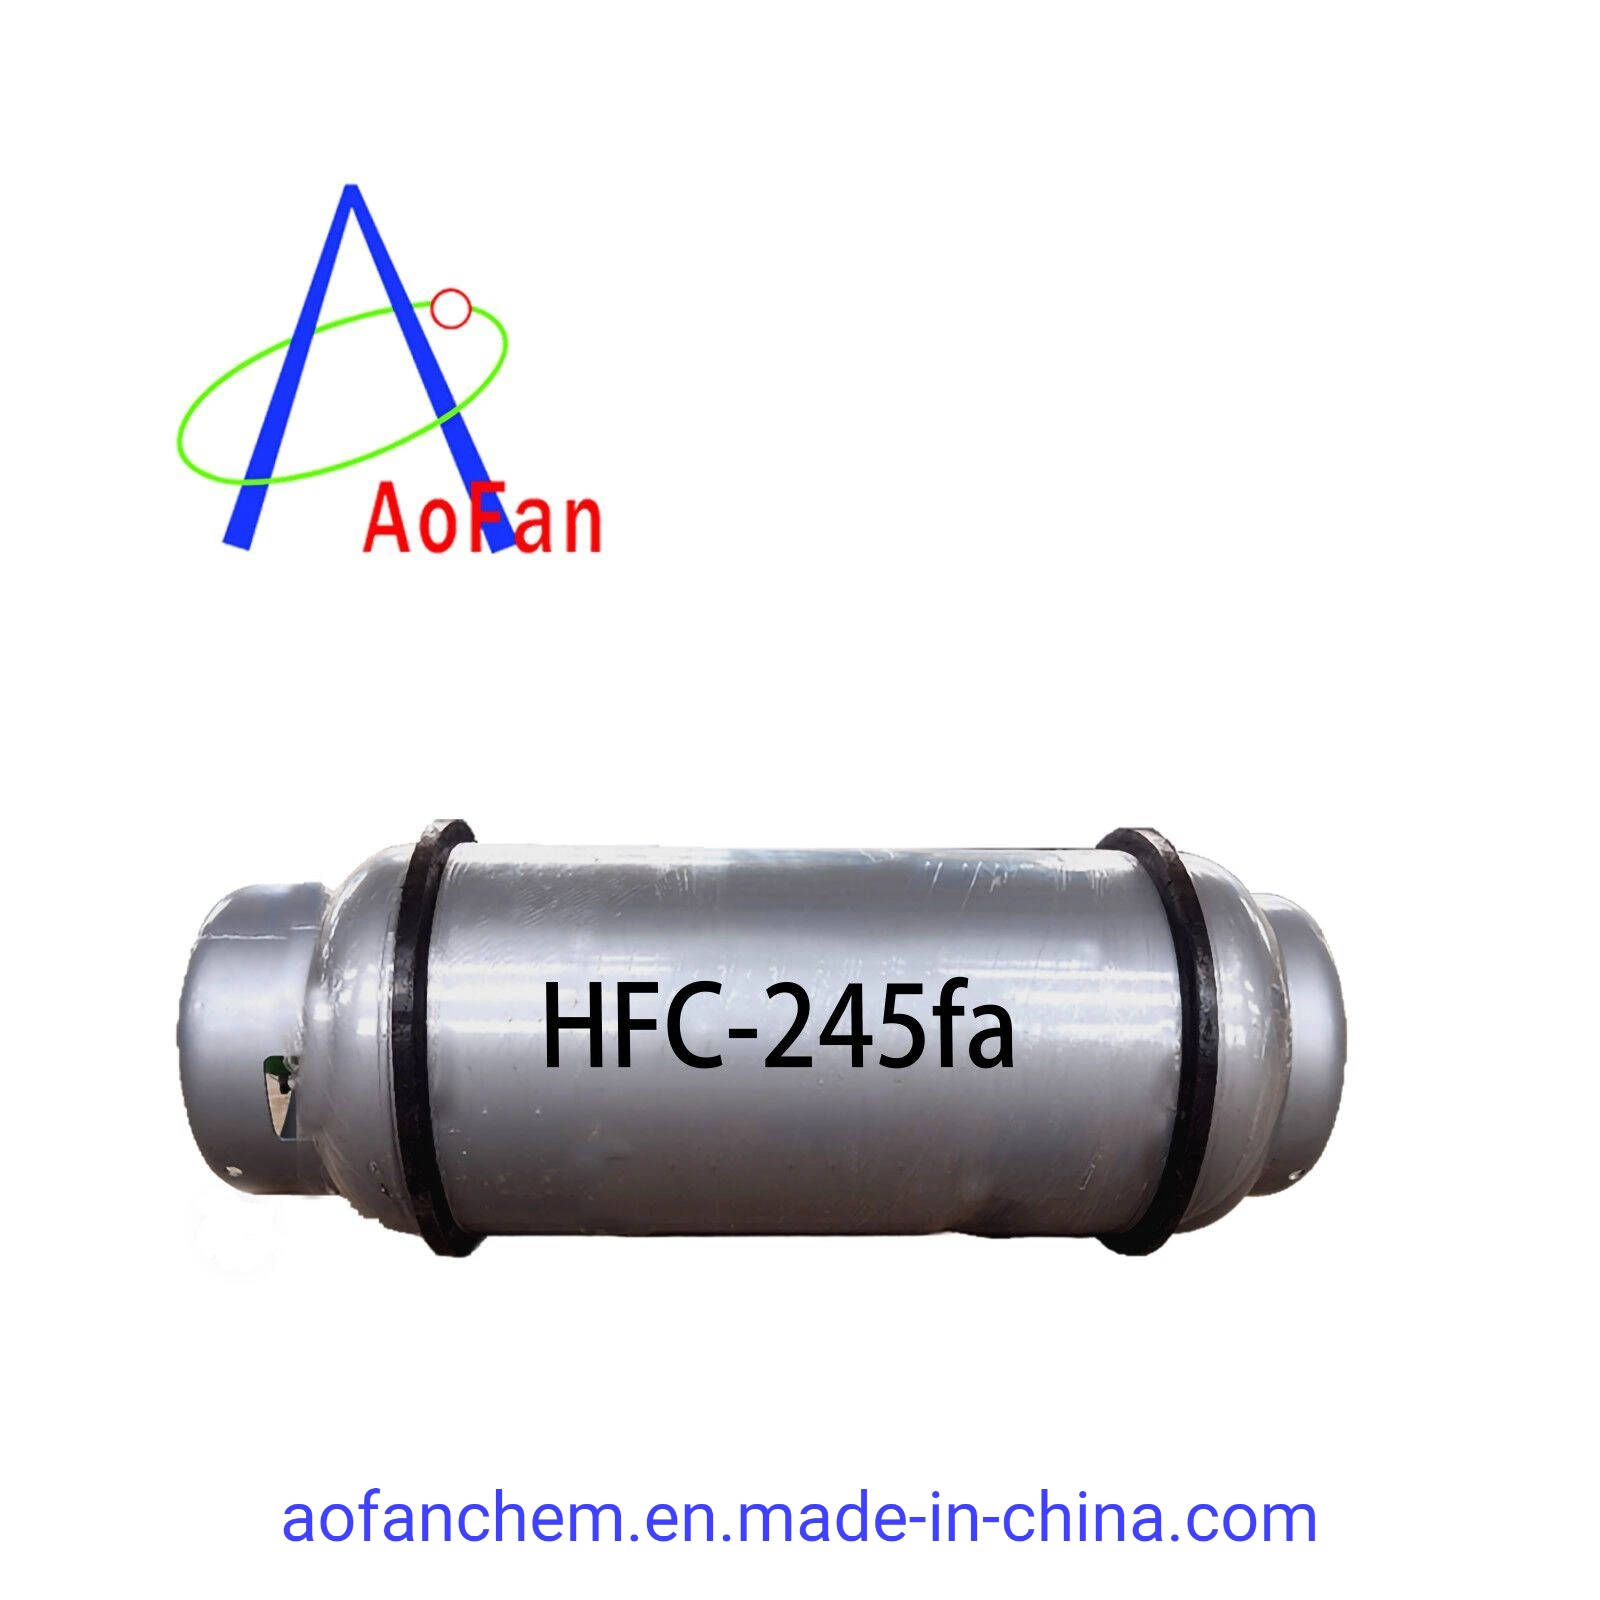 China Factory Price Fluorine Refrigerant Chinese Manufacturer From China Hfc-245fa